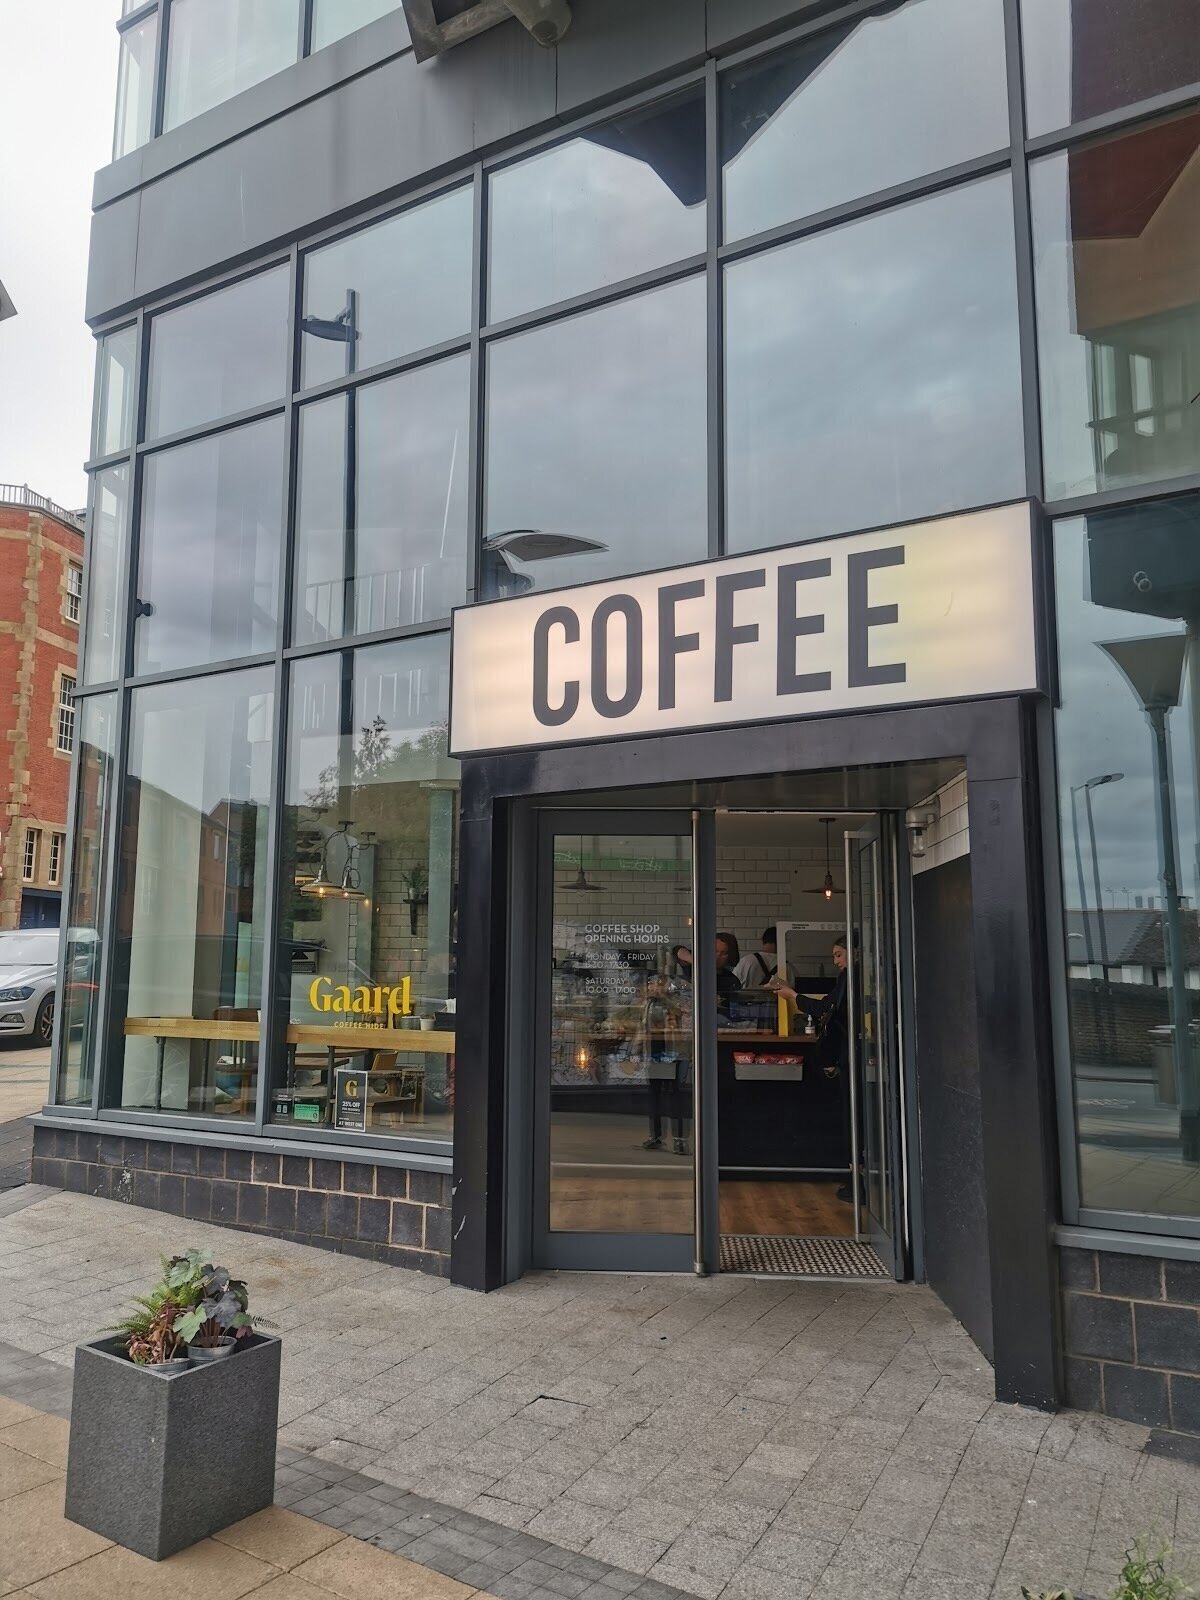 <span class="translation_missing" title="translation missing: en.meta.location_title, location_name: Gaard 2 Coffee Hide, city: Sheffield">Location Title</span>